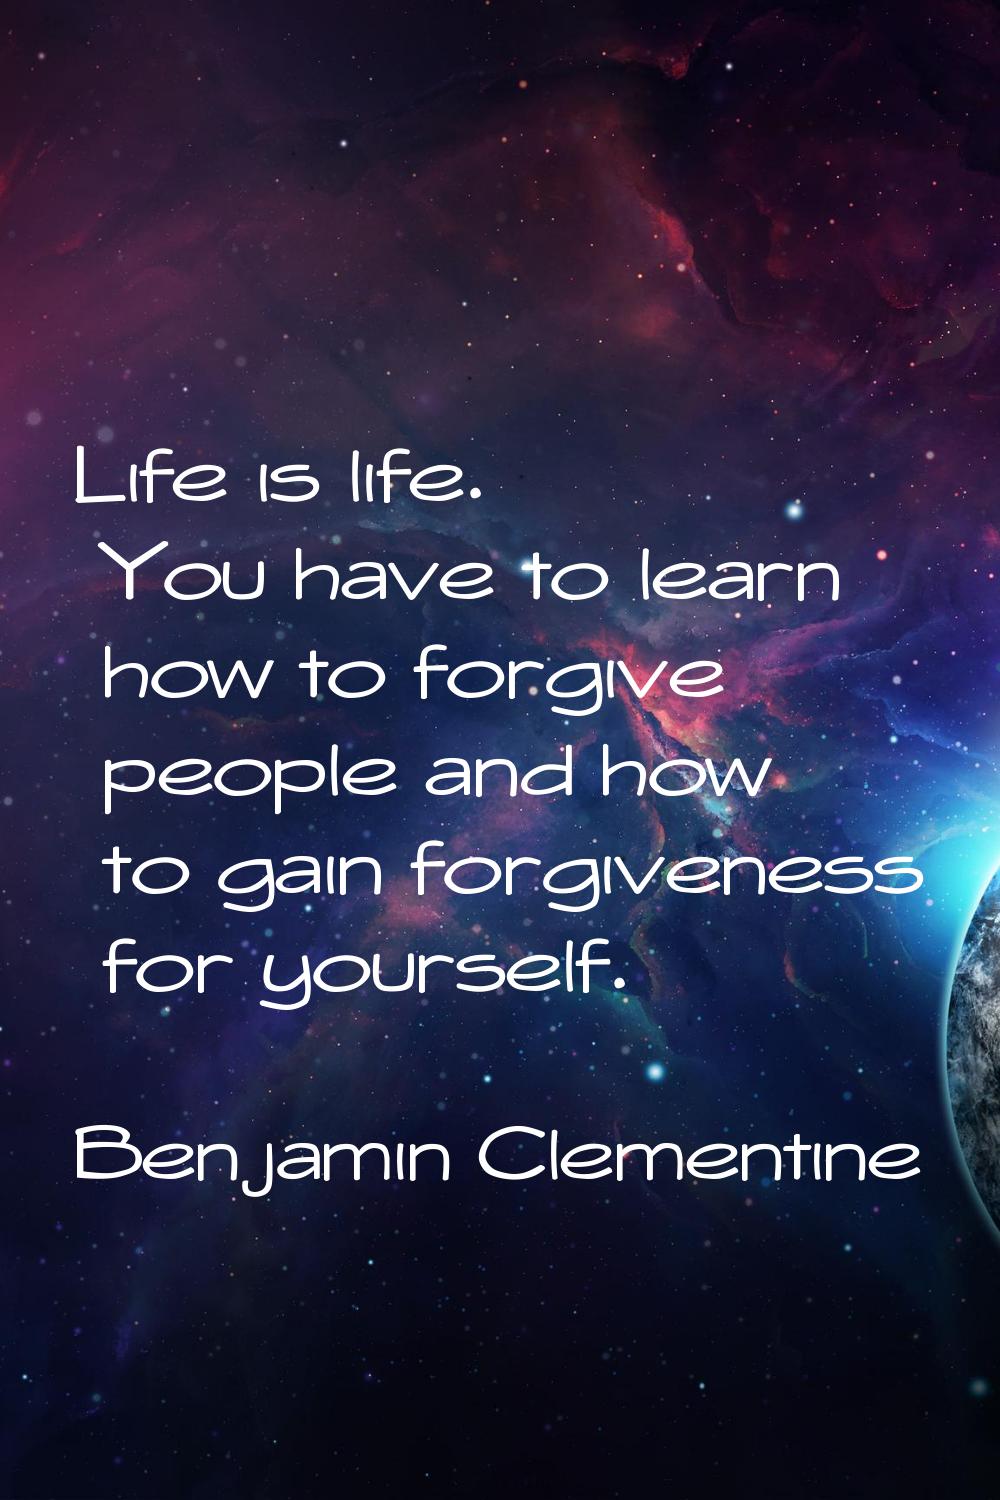 Life is life. You have to learn how to forgive people and how to gain forgiveness for yourself.